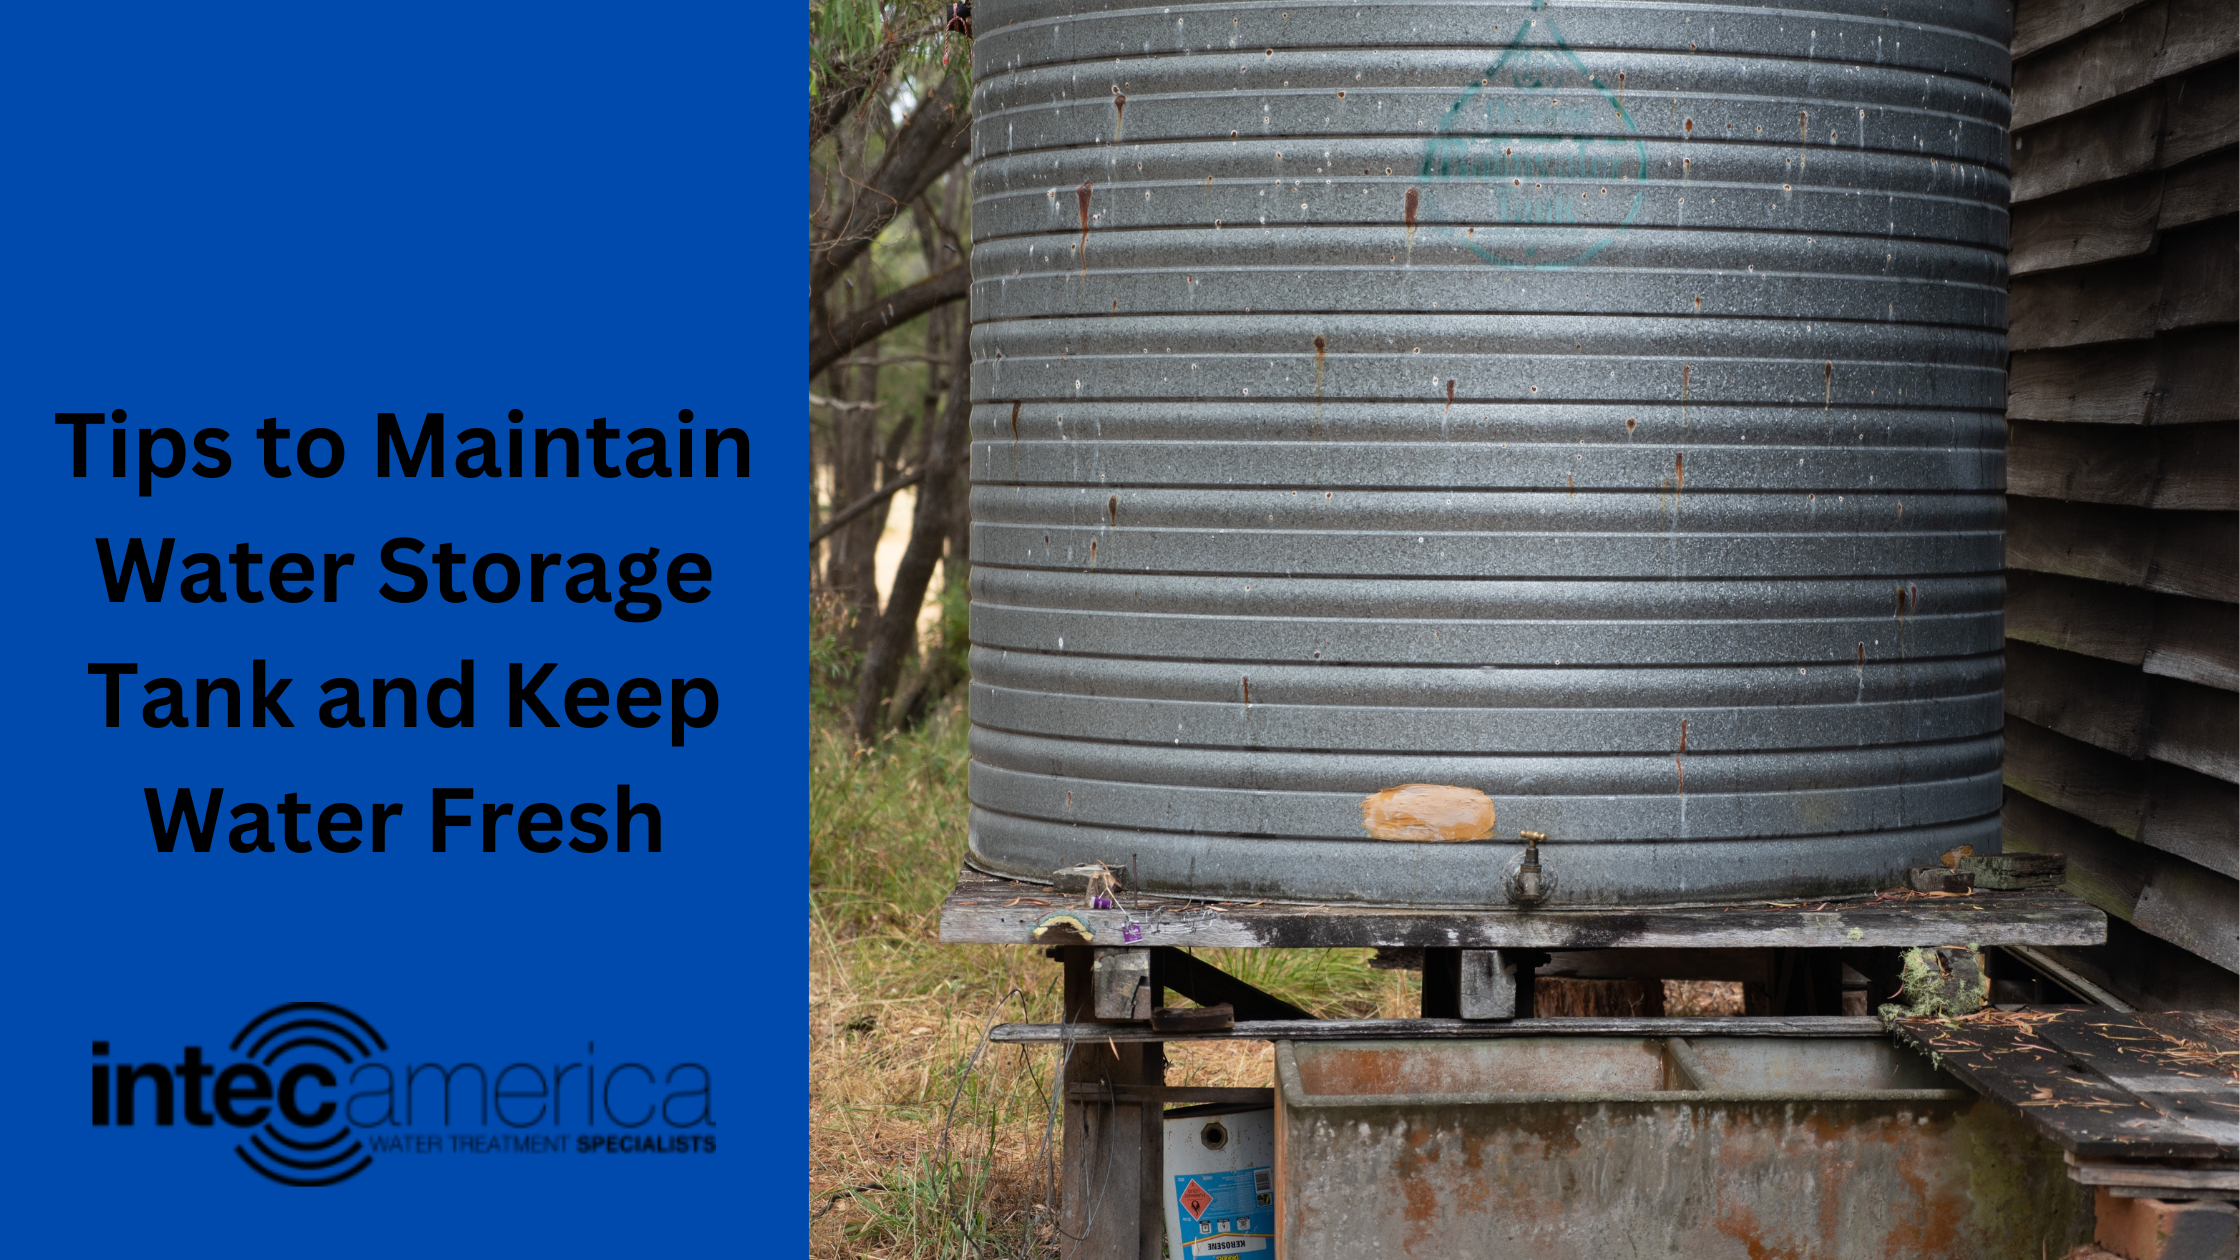 Tips to Maintain Water Storage Tank and Keep Water Fresh